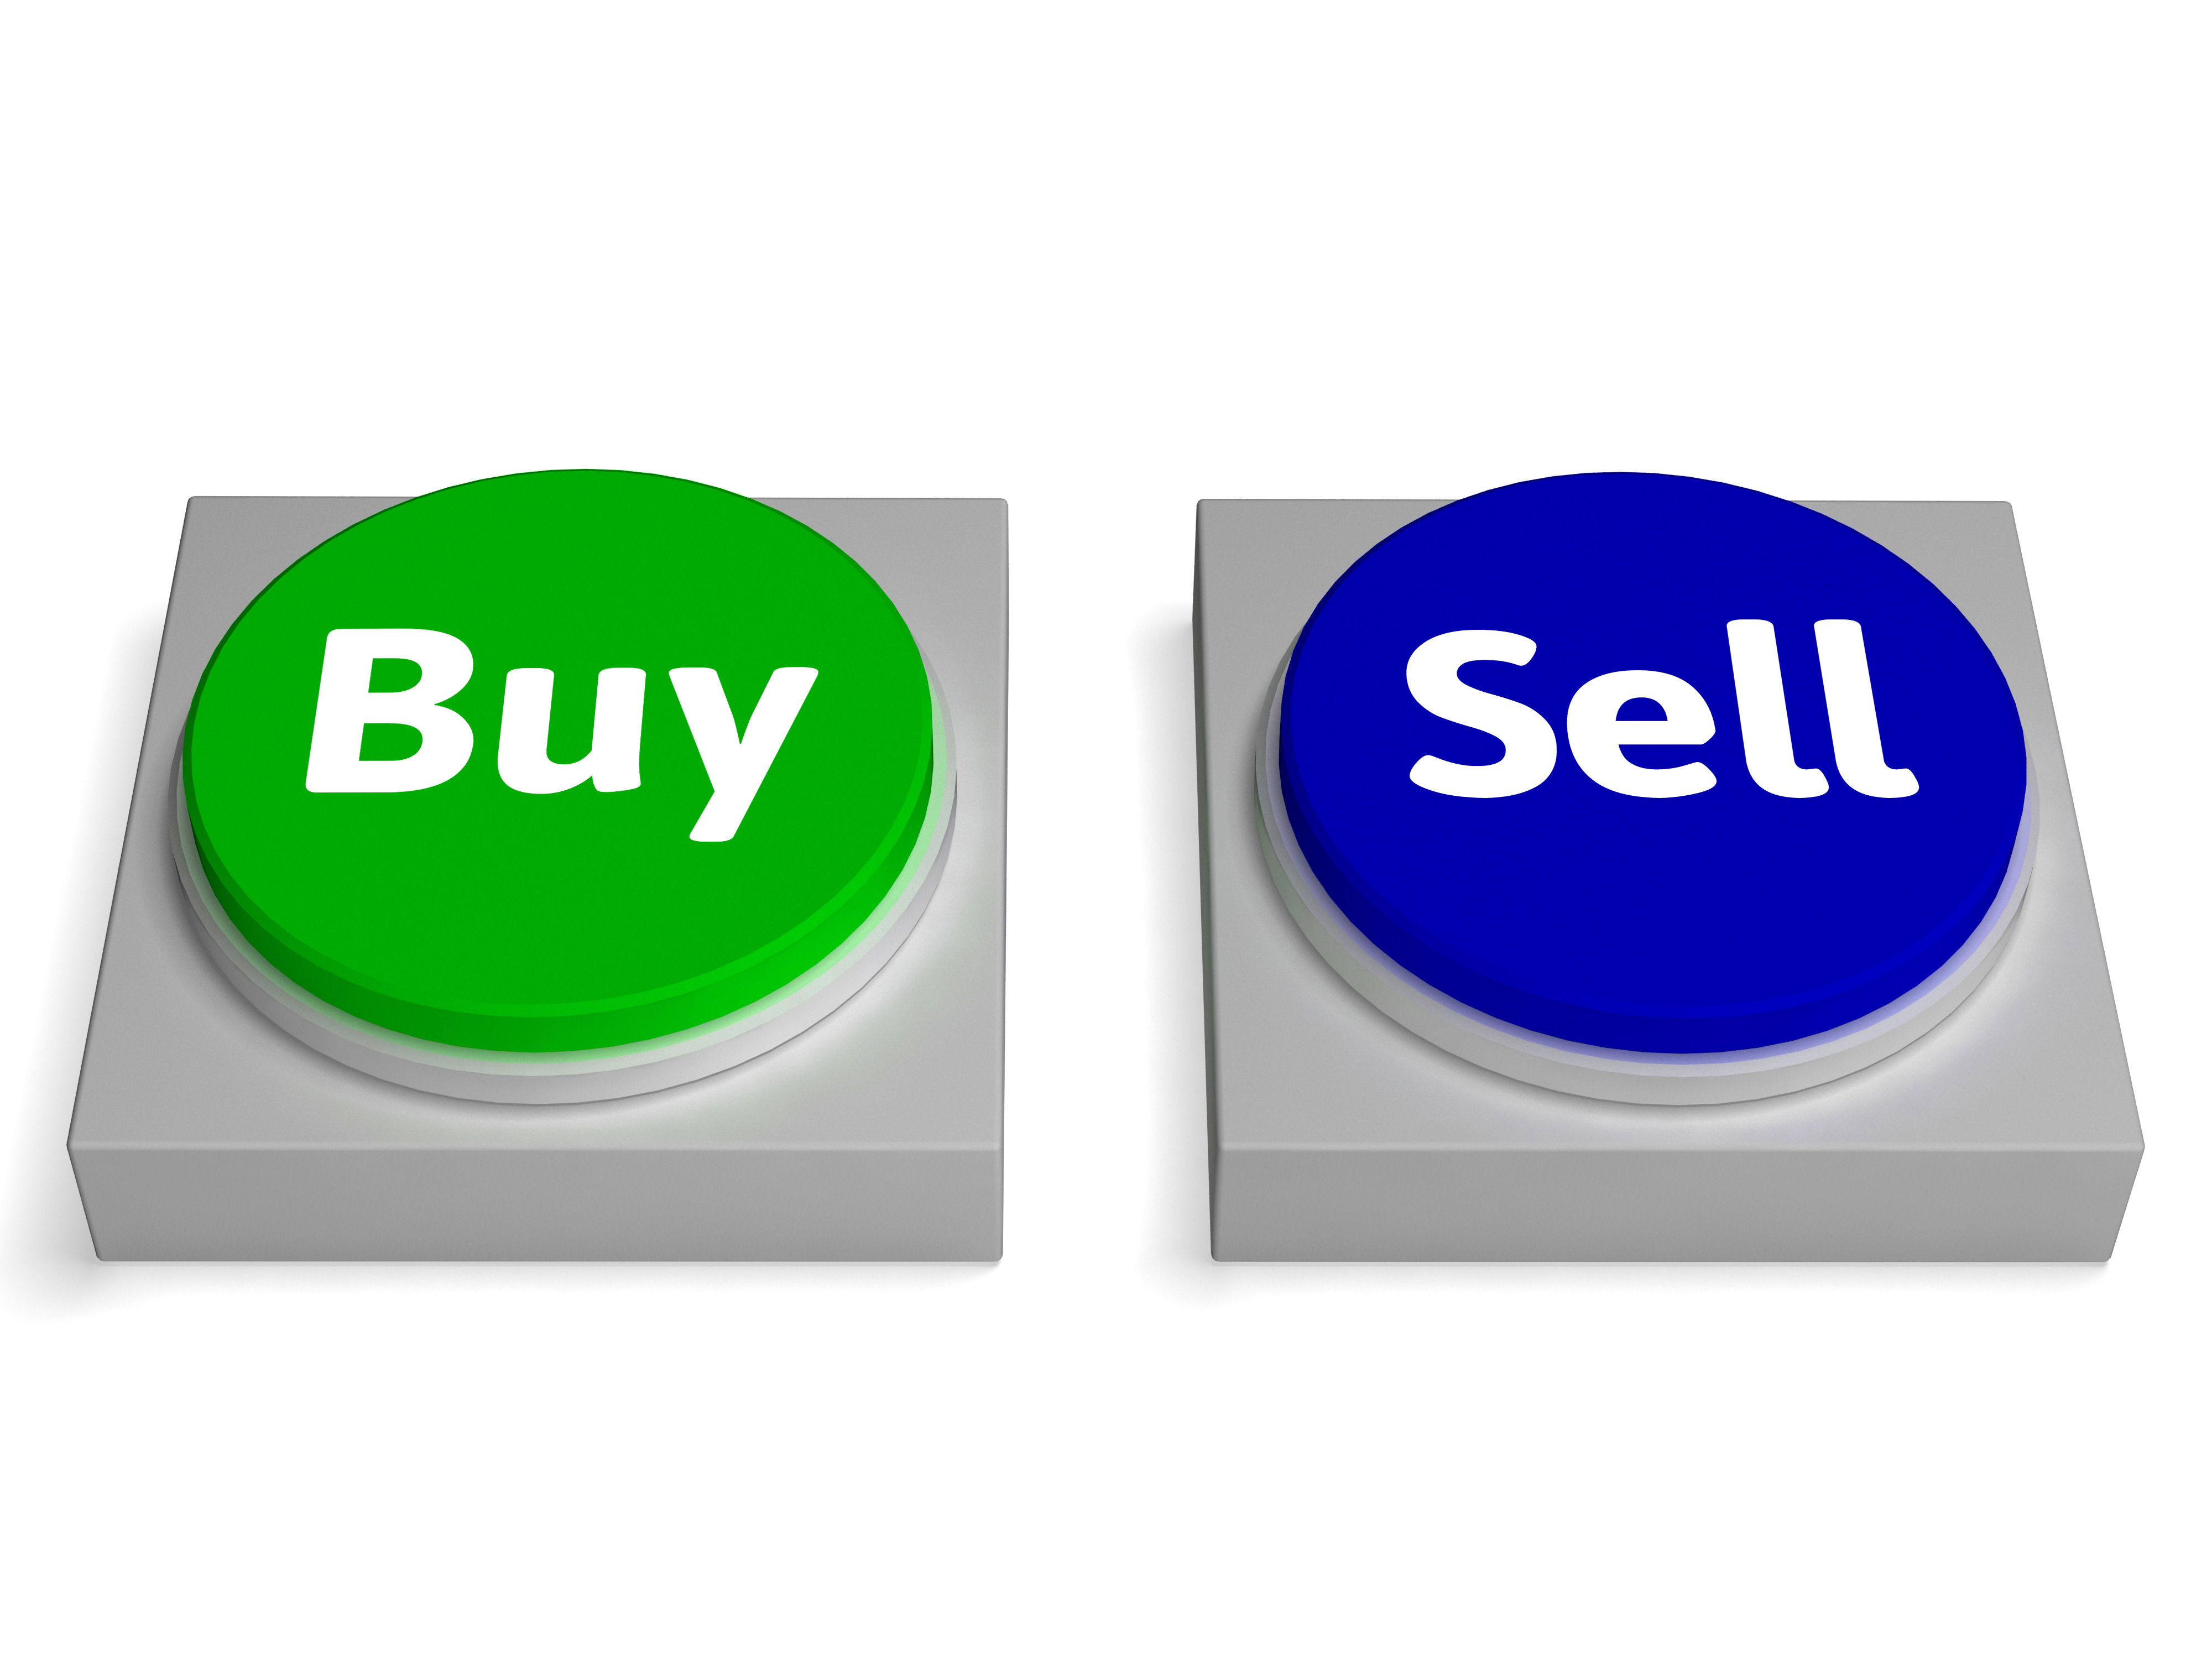 Buy Sell Buttons Shows Buying Or Selling